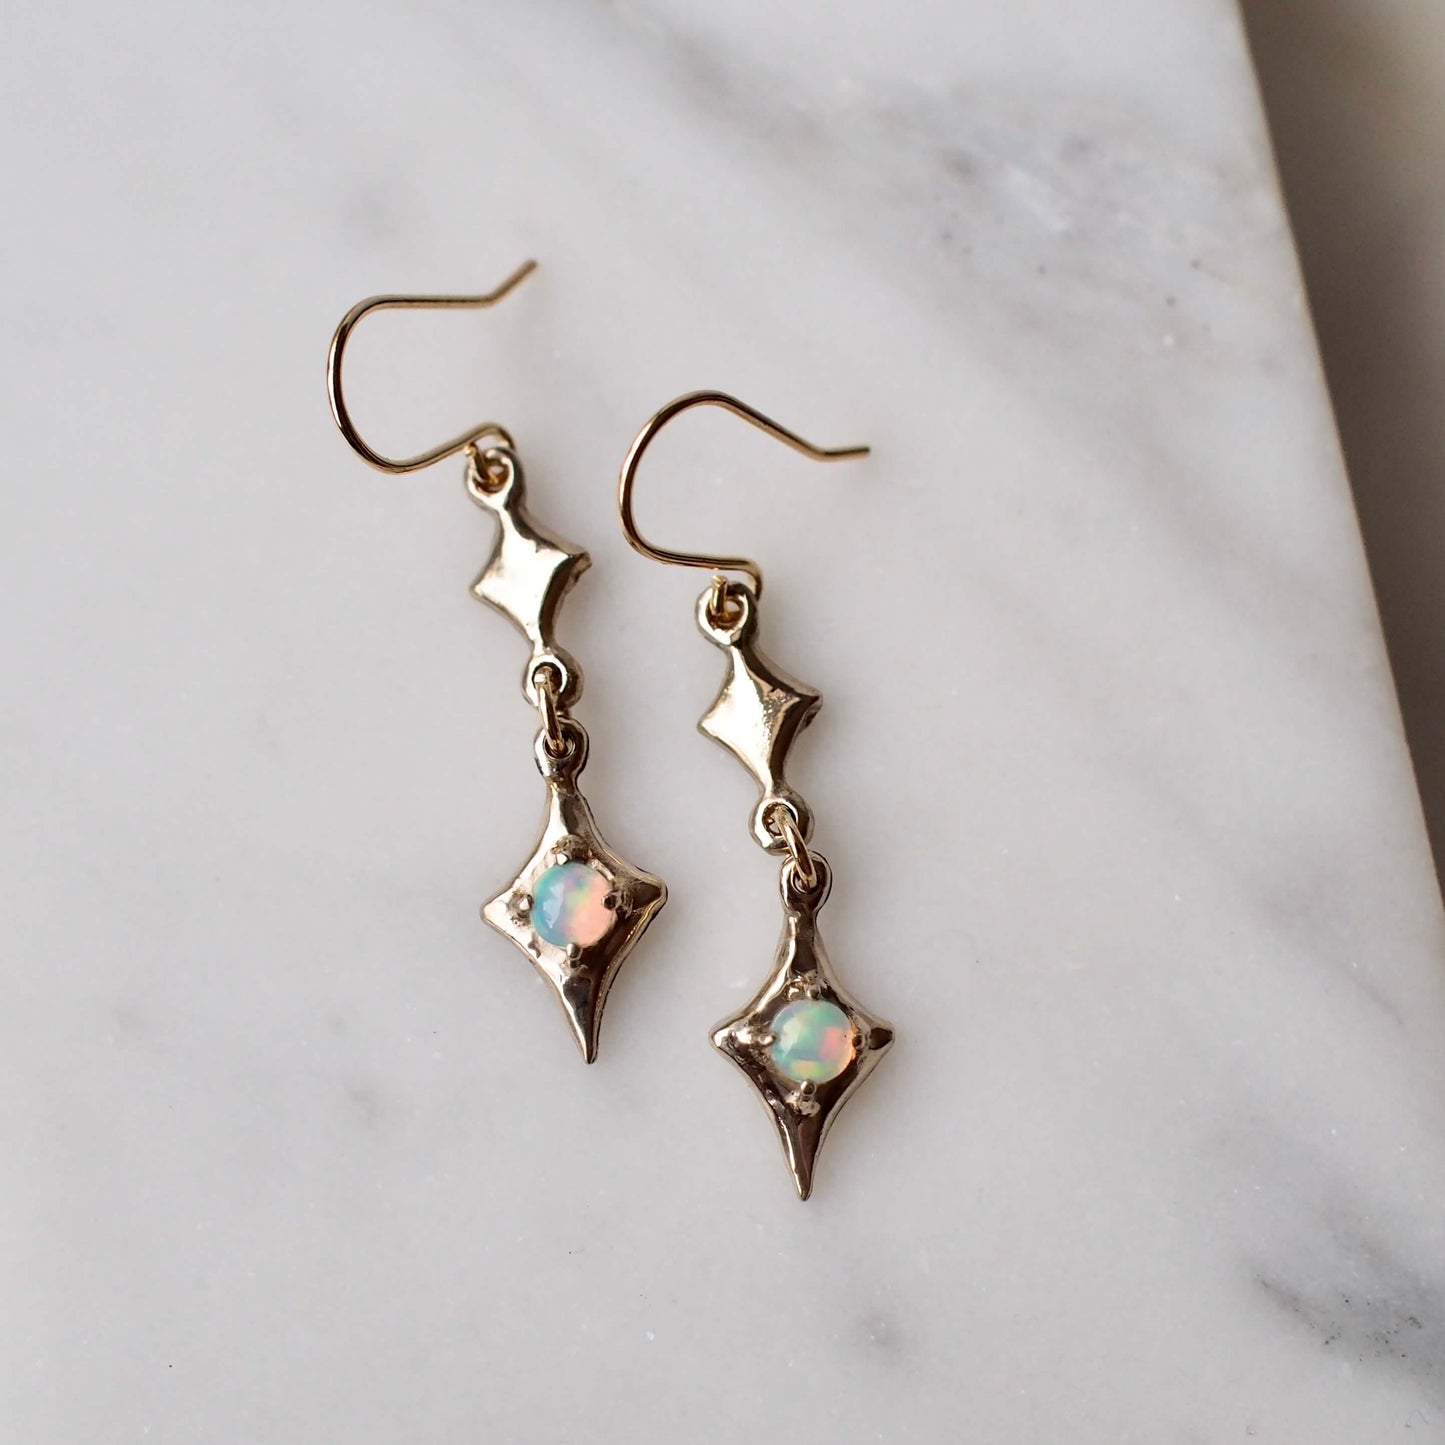 Sparkle emoji earrings featuring natural opals